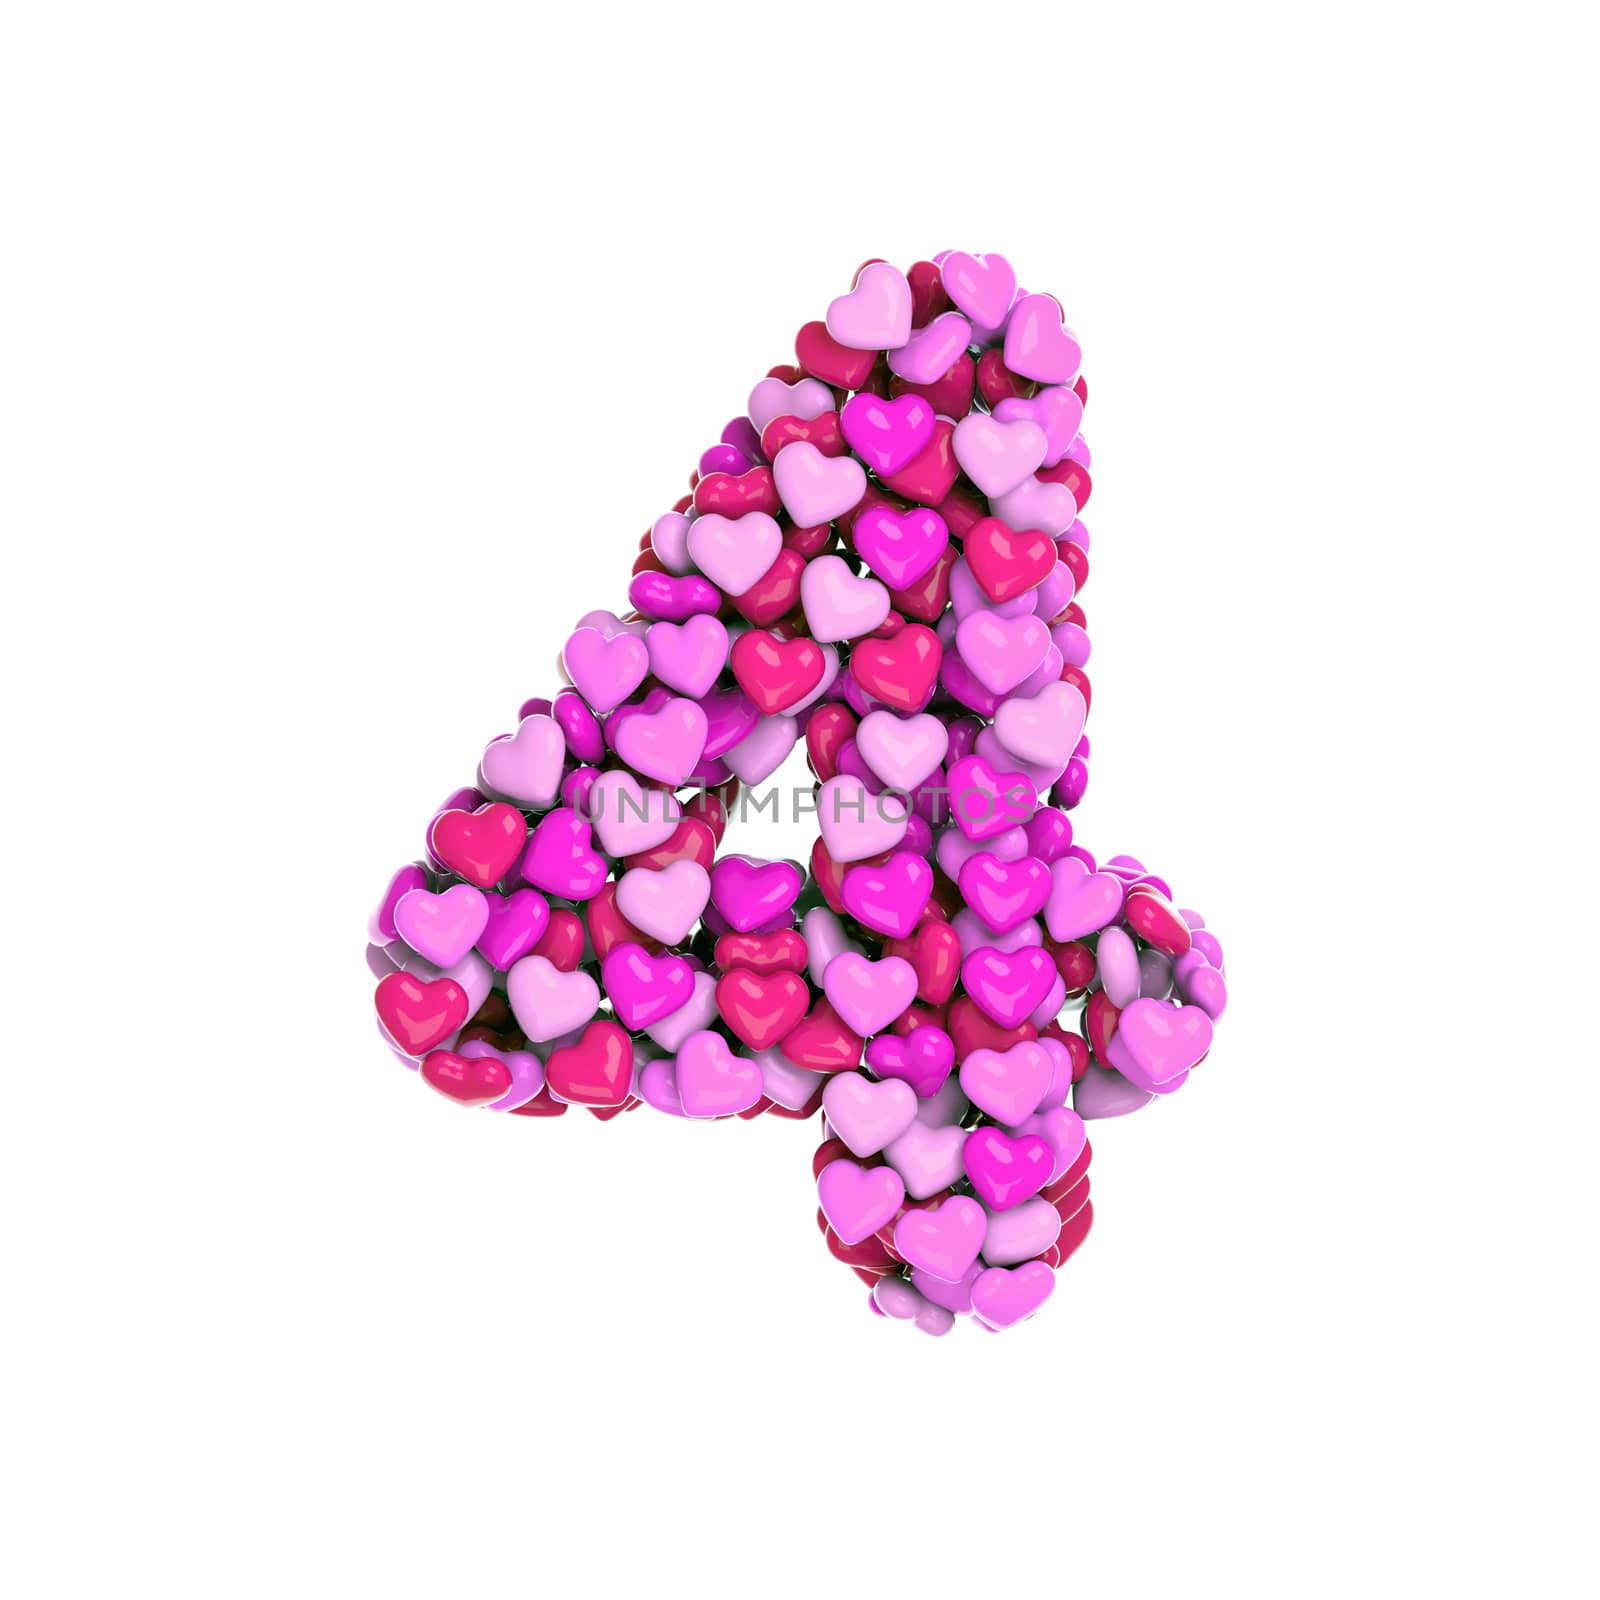 Valentine number 4 - 3d pink hearts digit isolated on white background. This alphabet is perfect for creative illustrations related but not limited to Love, passion, wedding...